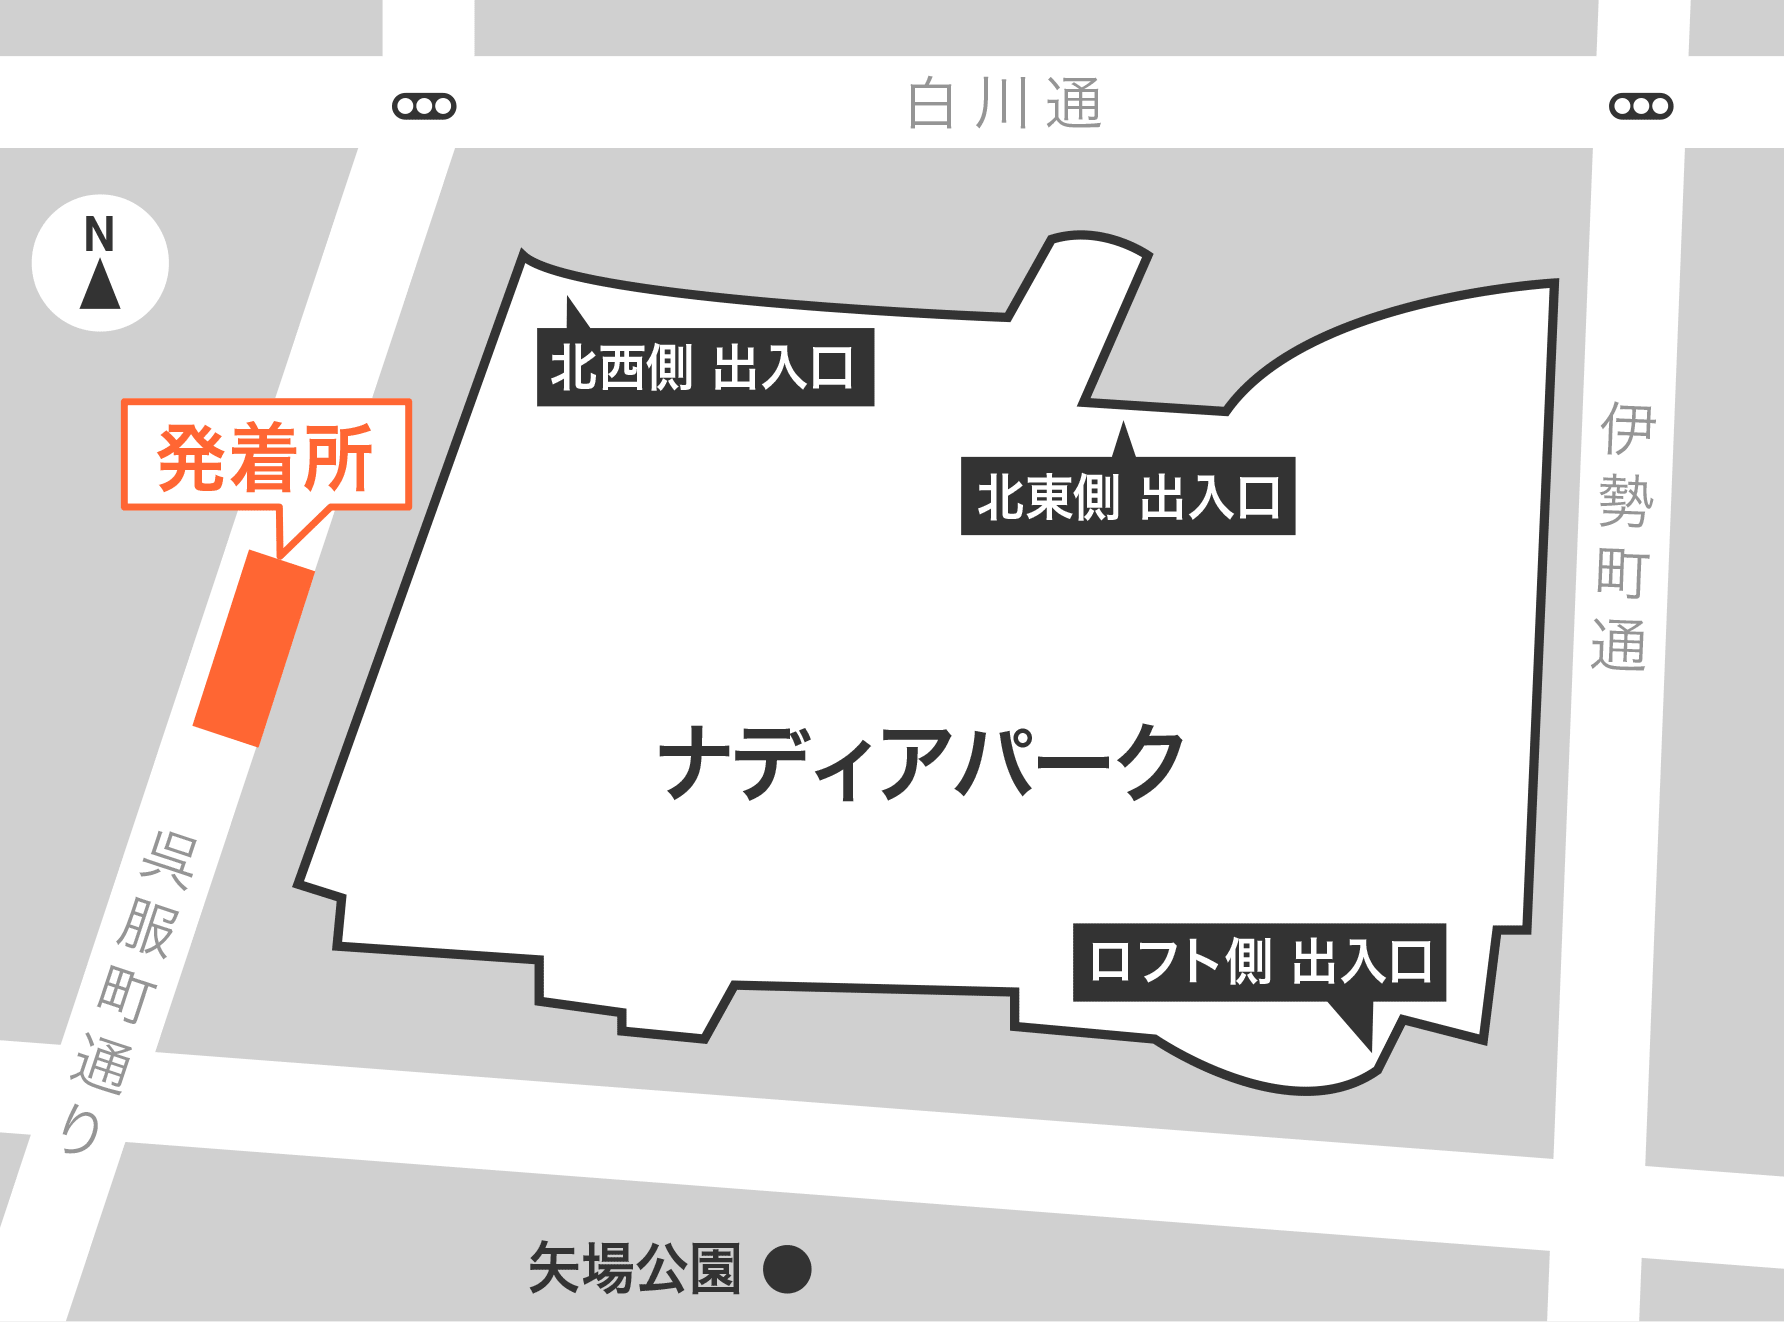 161128_s_bus_map4